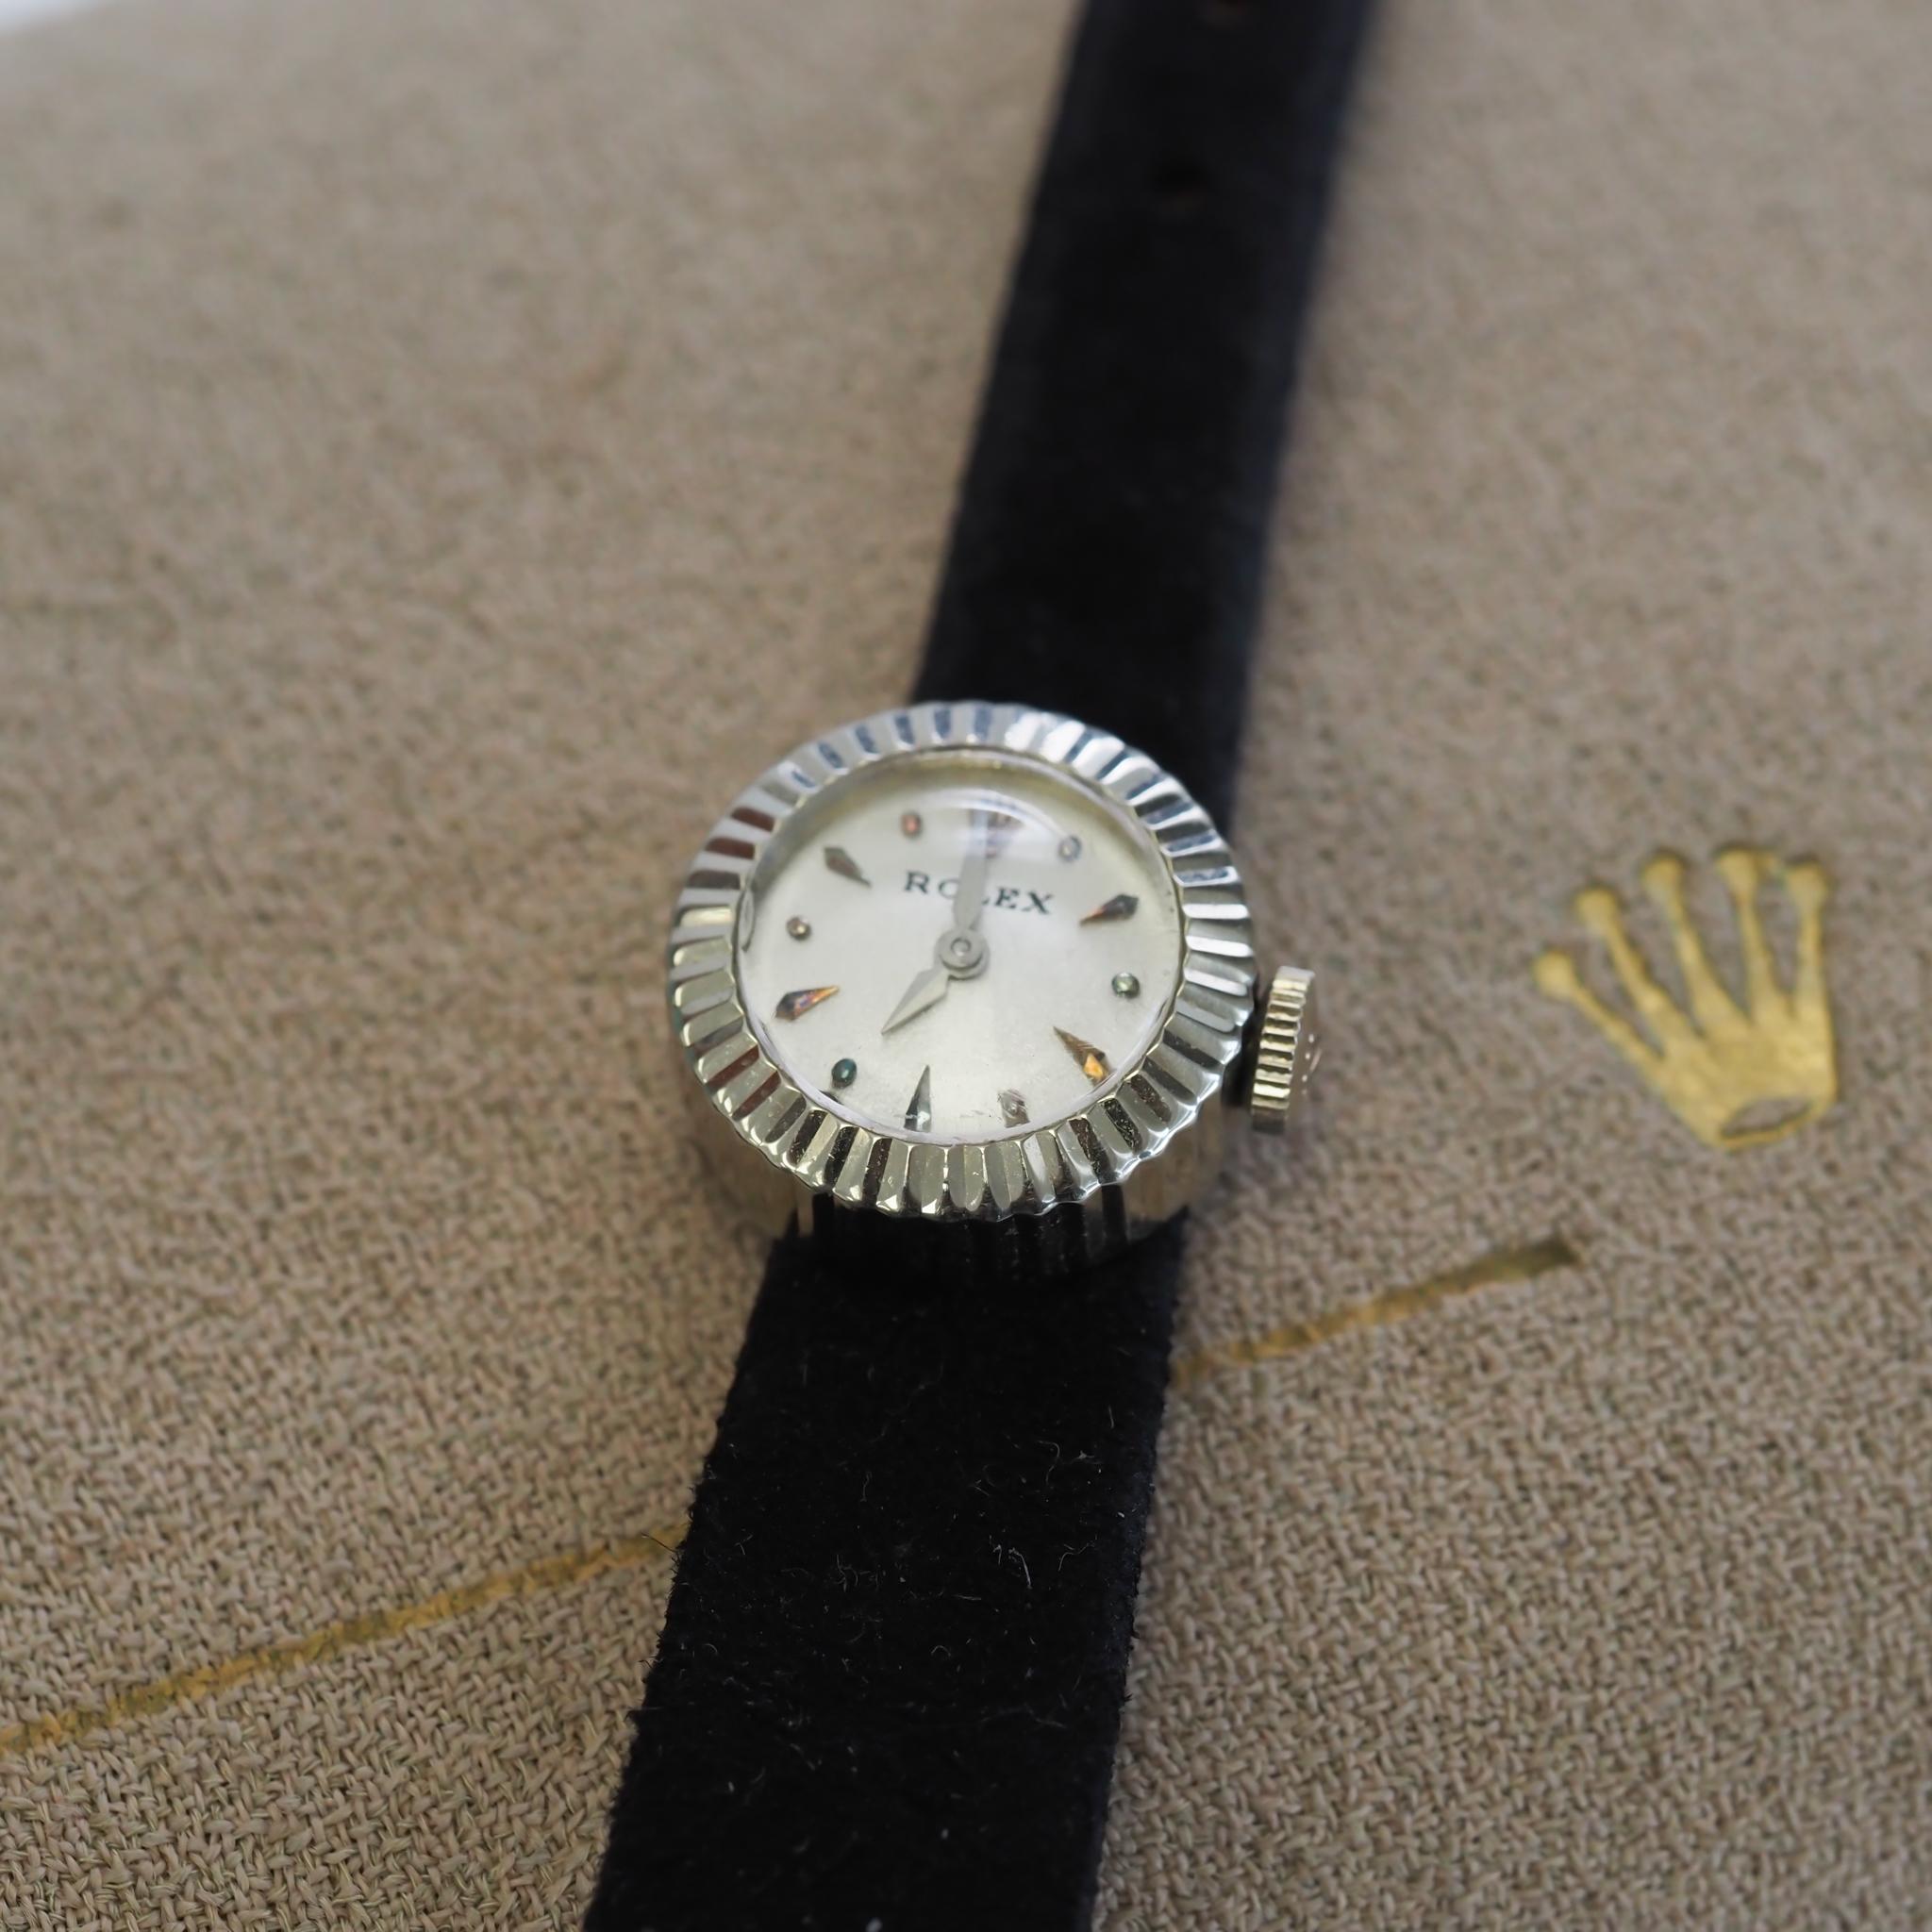 Case Size: 17.5mm
Metal Type: 18K White Gold [Hallmarked, and Tested]
*Comes with original BOX and 2 extra Rolex Straps.
Watch Maker: Rolex
Condition: Excellent, Running.